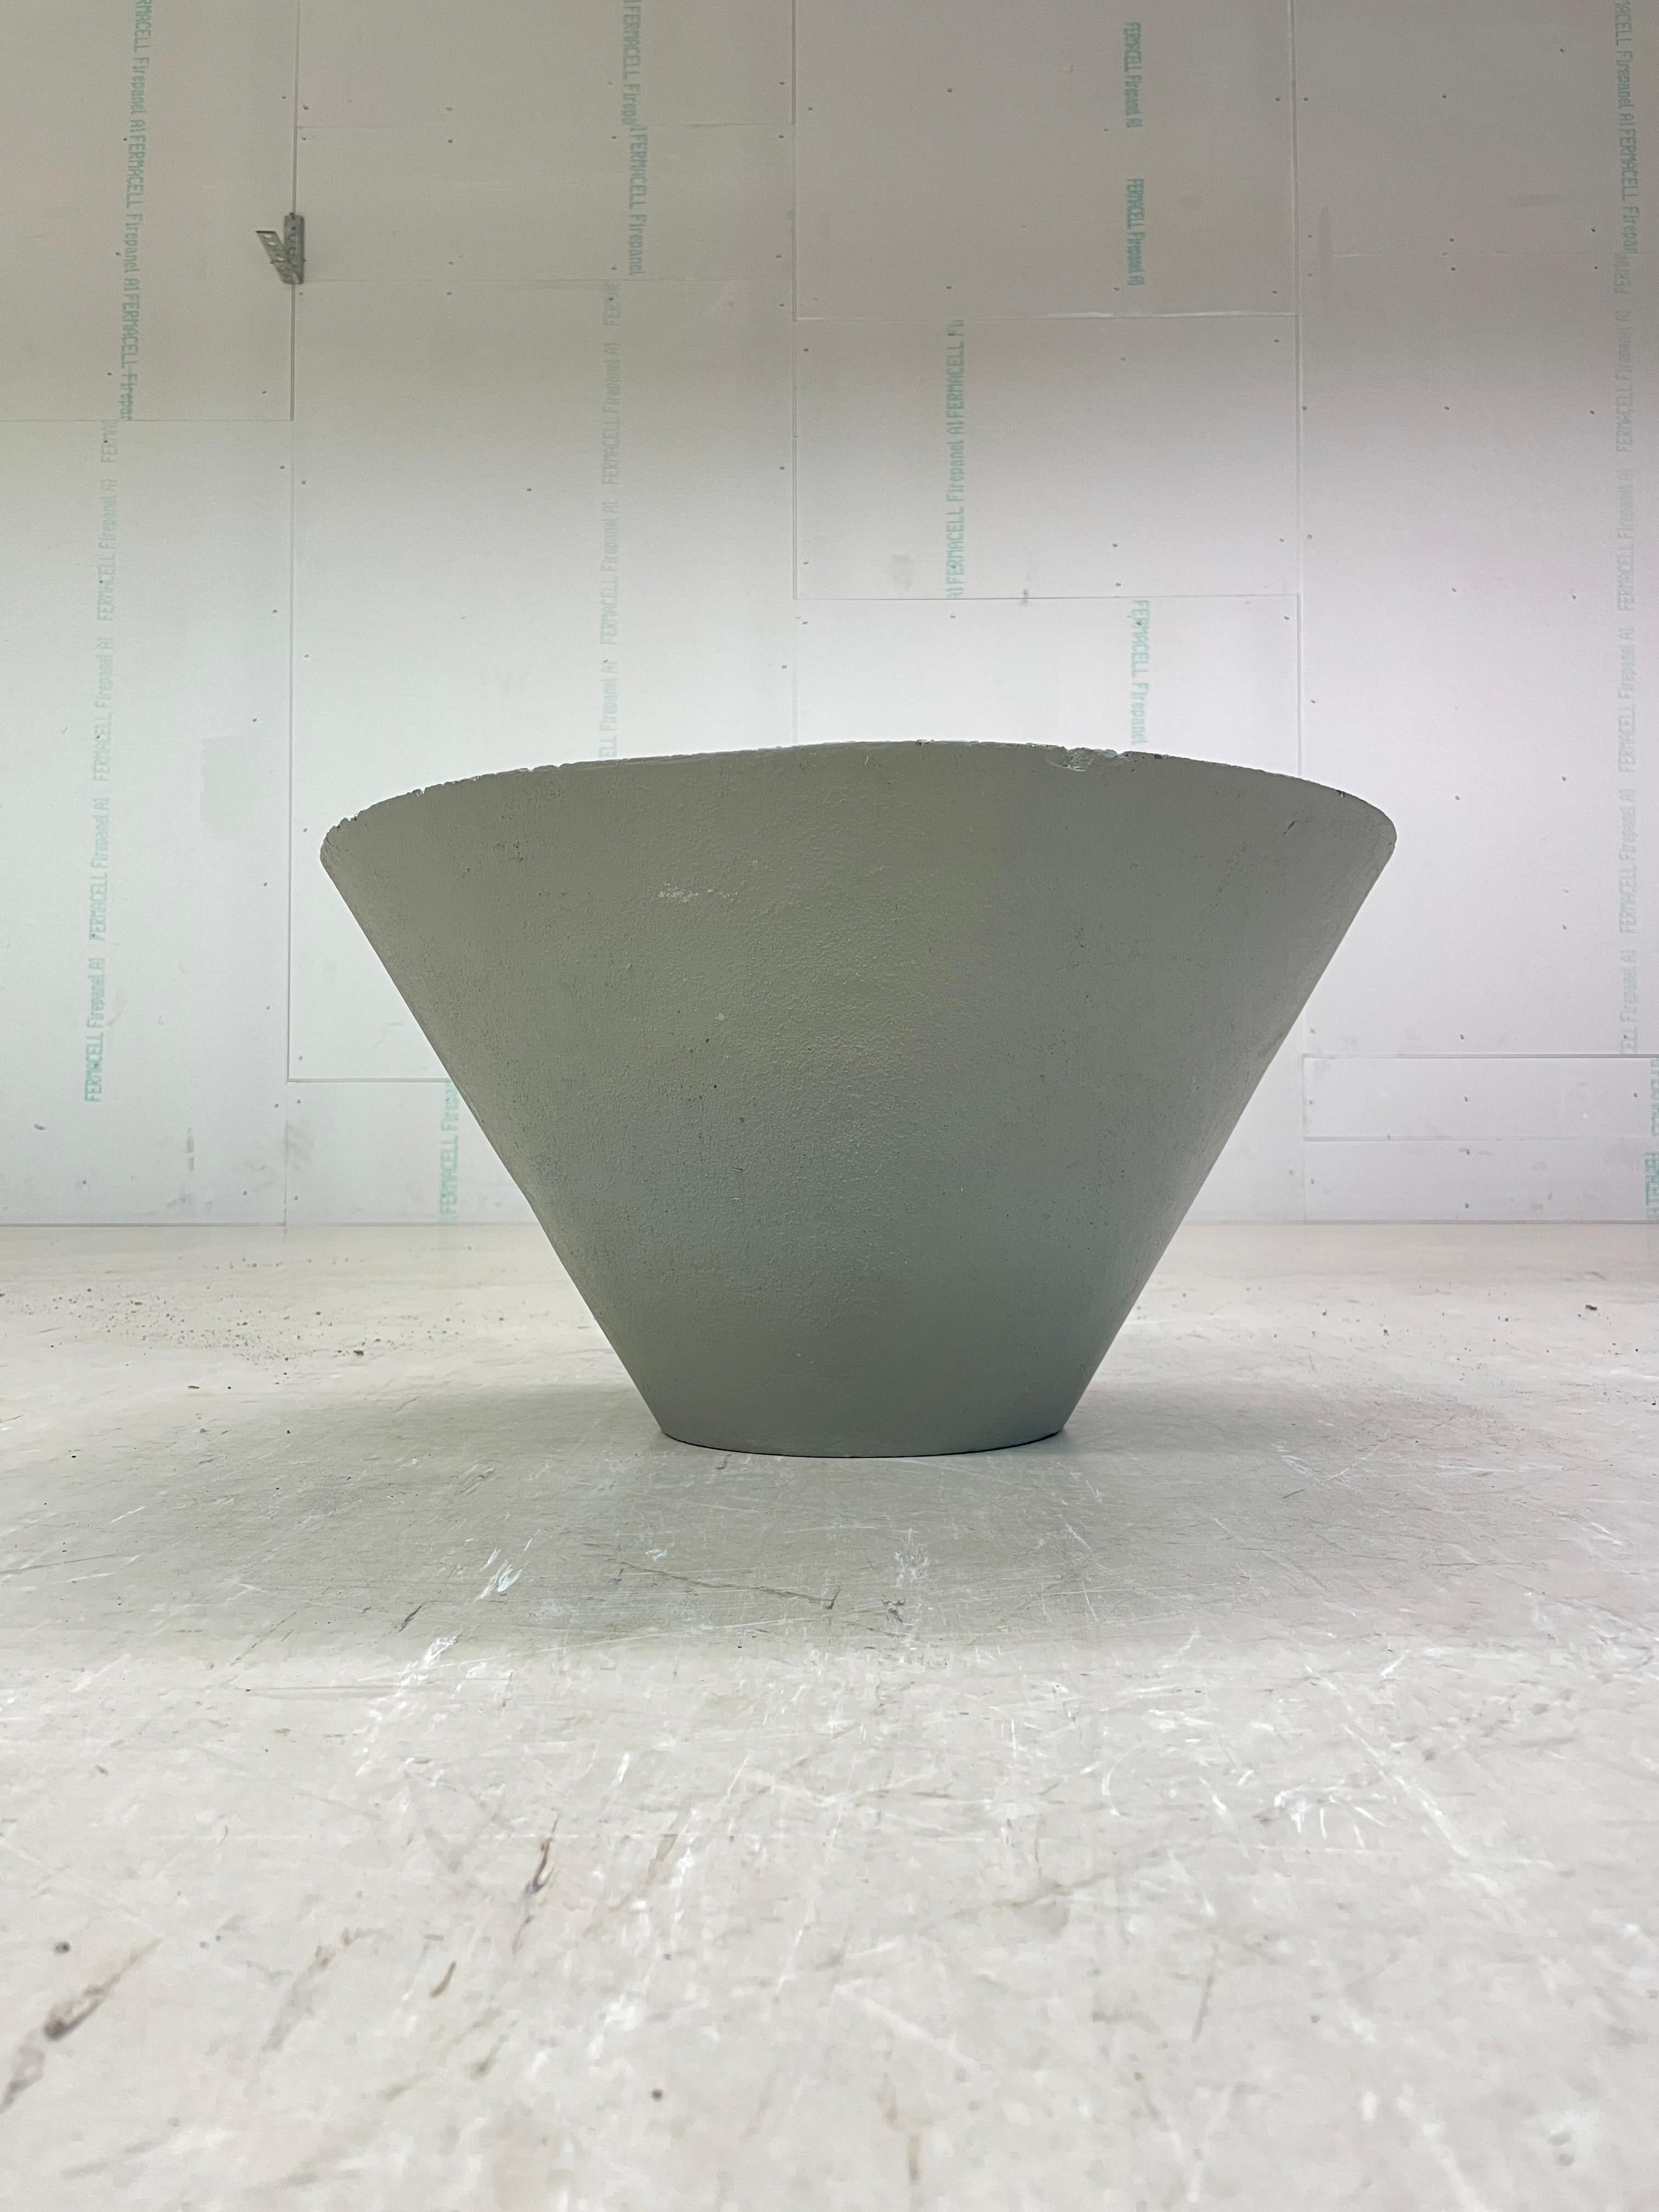 Concrete Willy Guhl Conical Planter - Eternit AG, Switzerland #11 For Sale